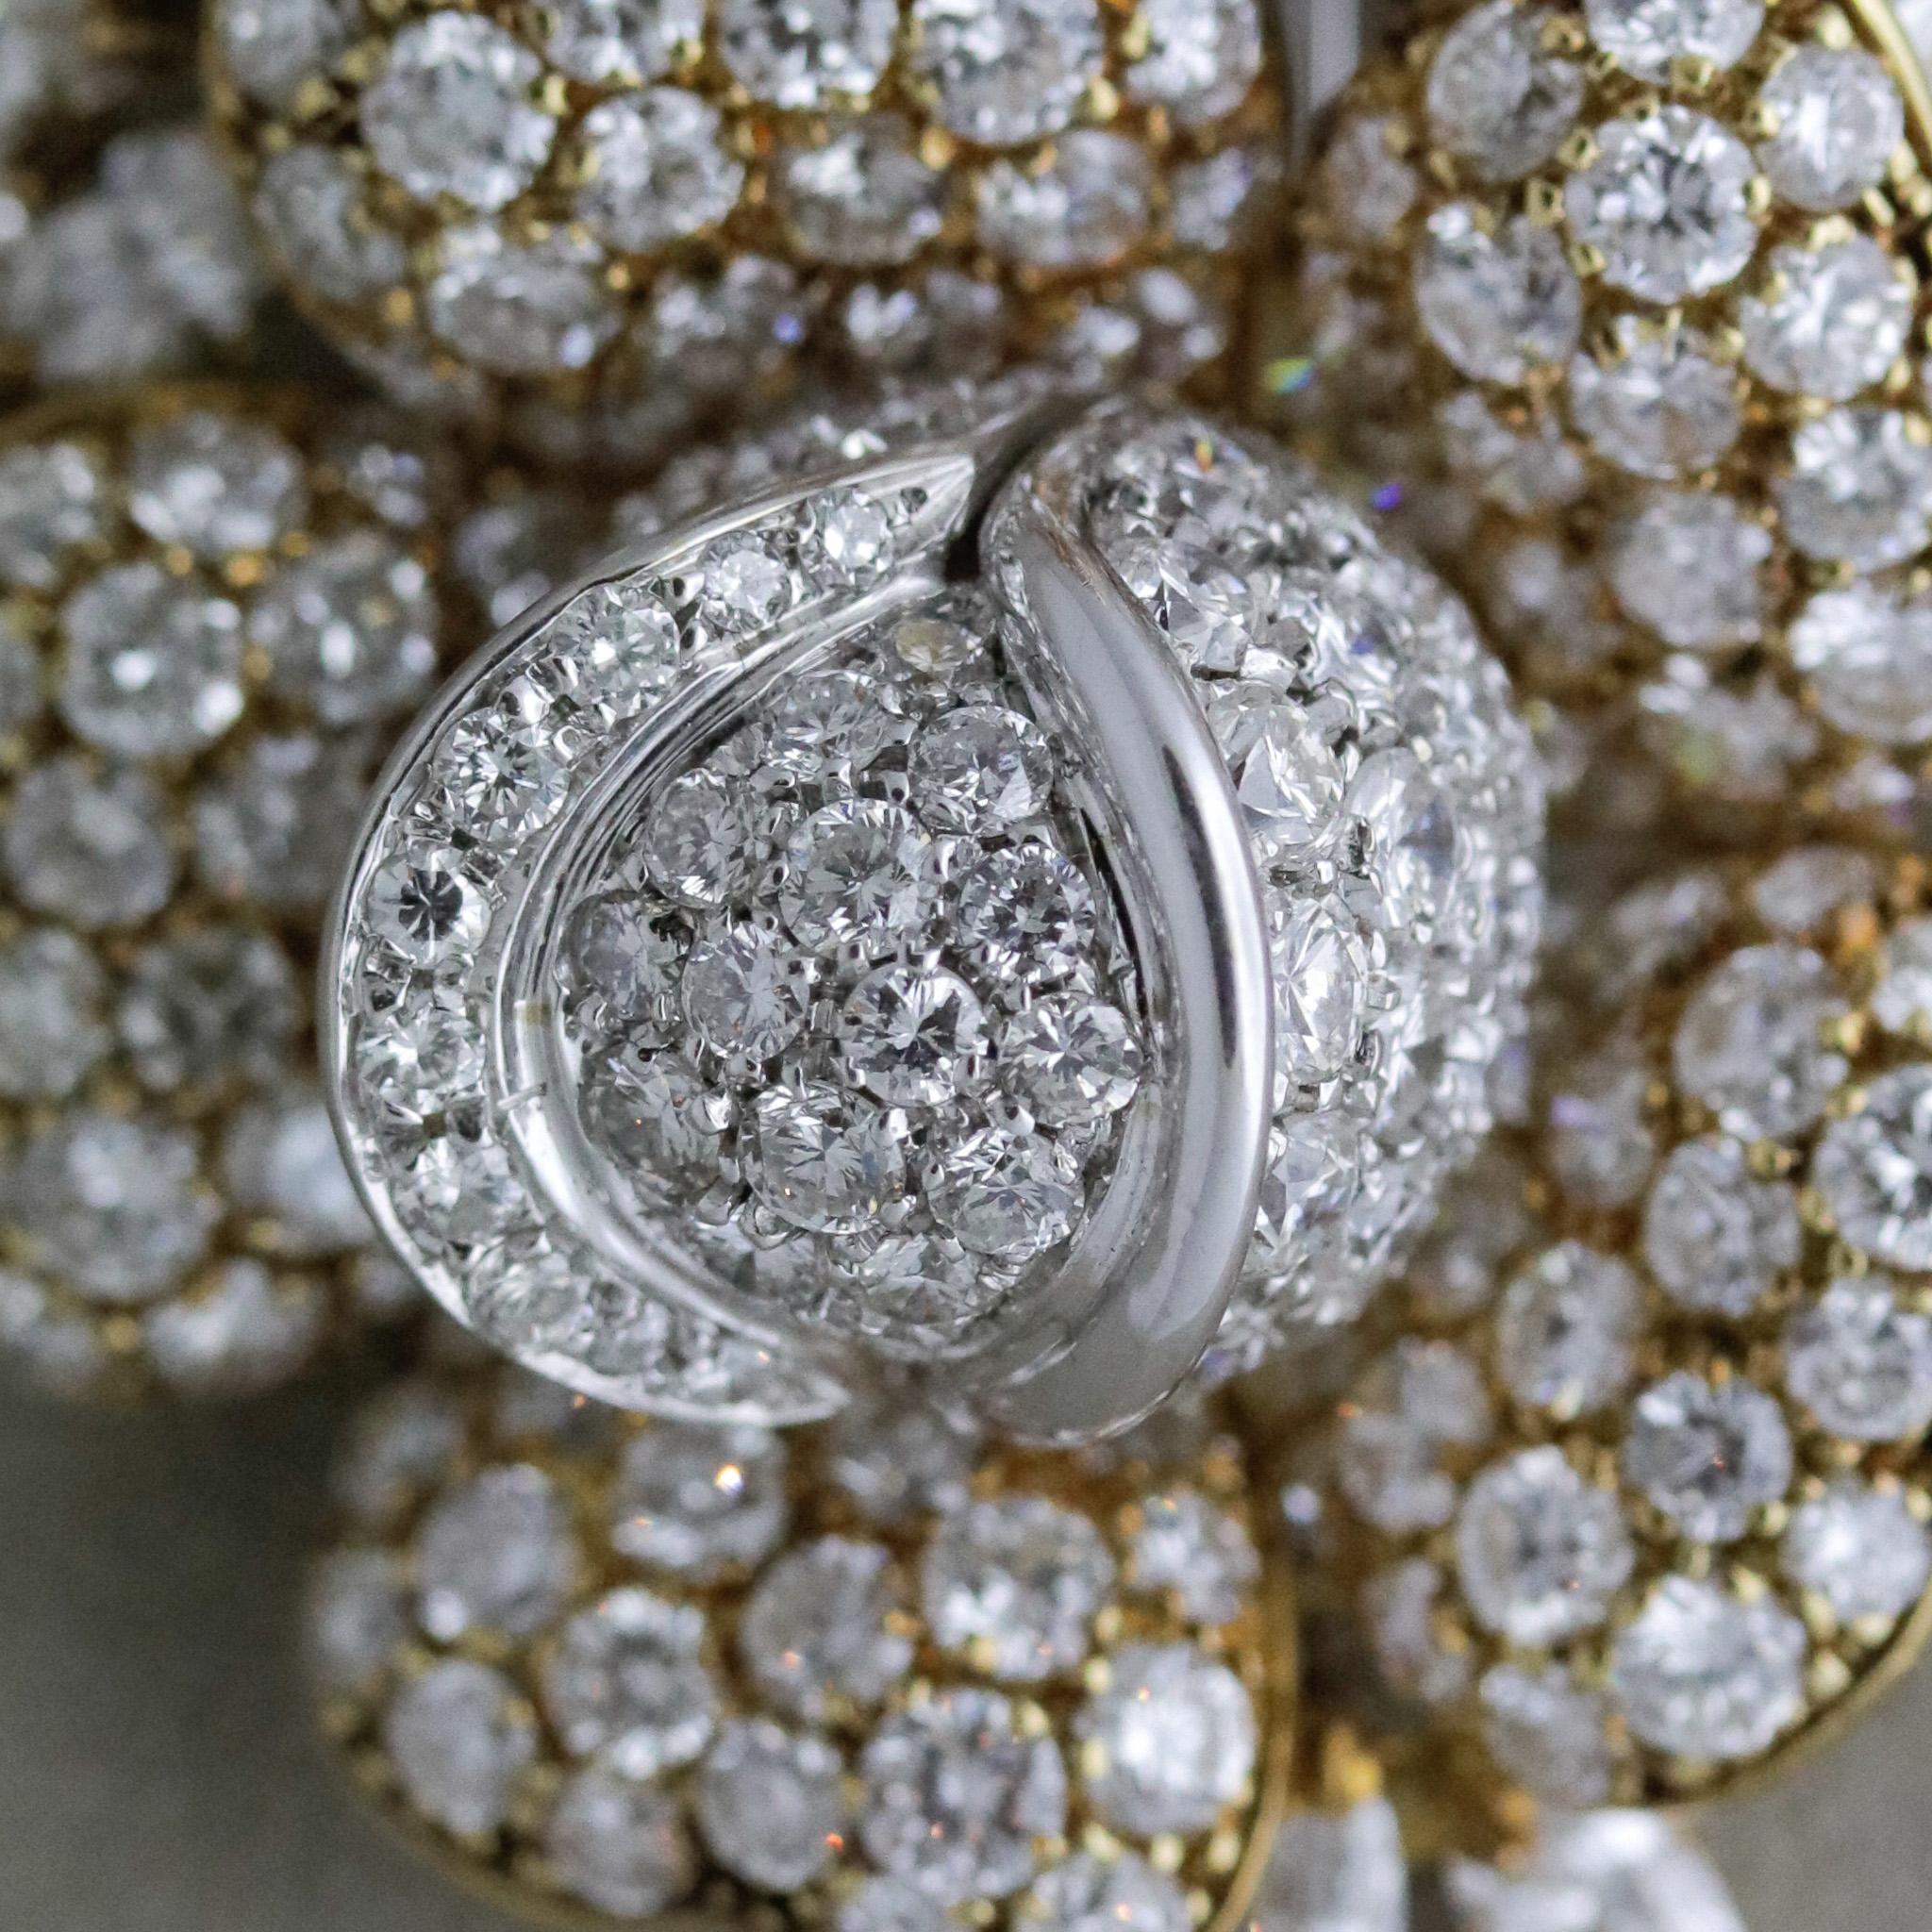 A stunning diamond studded piece by Graff, known for their exceptional world-class diamonds and gemstones. The brooch features approximately 20 carats of diamonds set over a bouquet of 2 blossoming fold flowers. They include round brilliant-cuts set